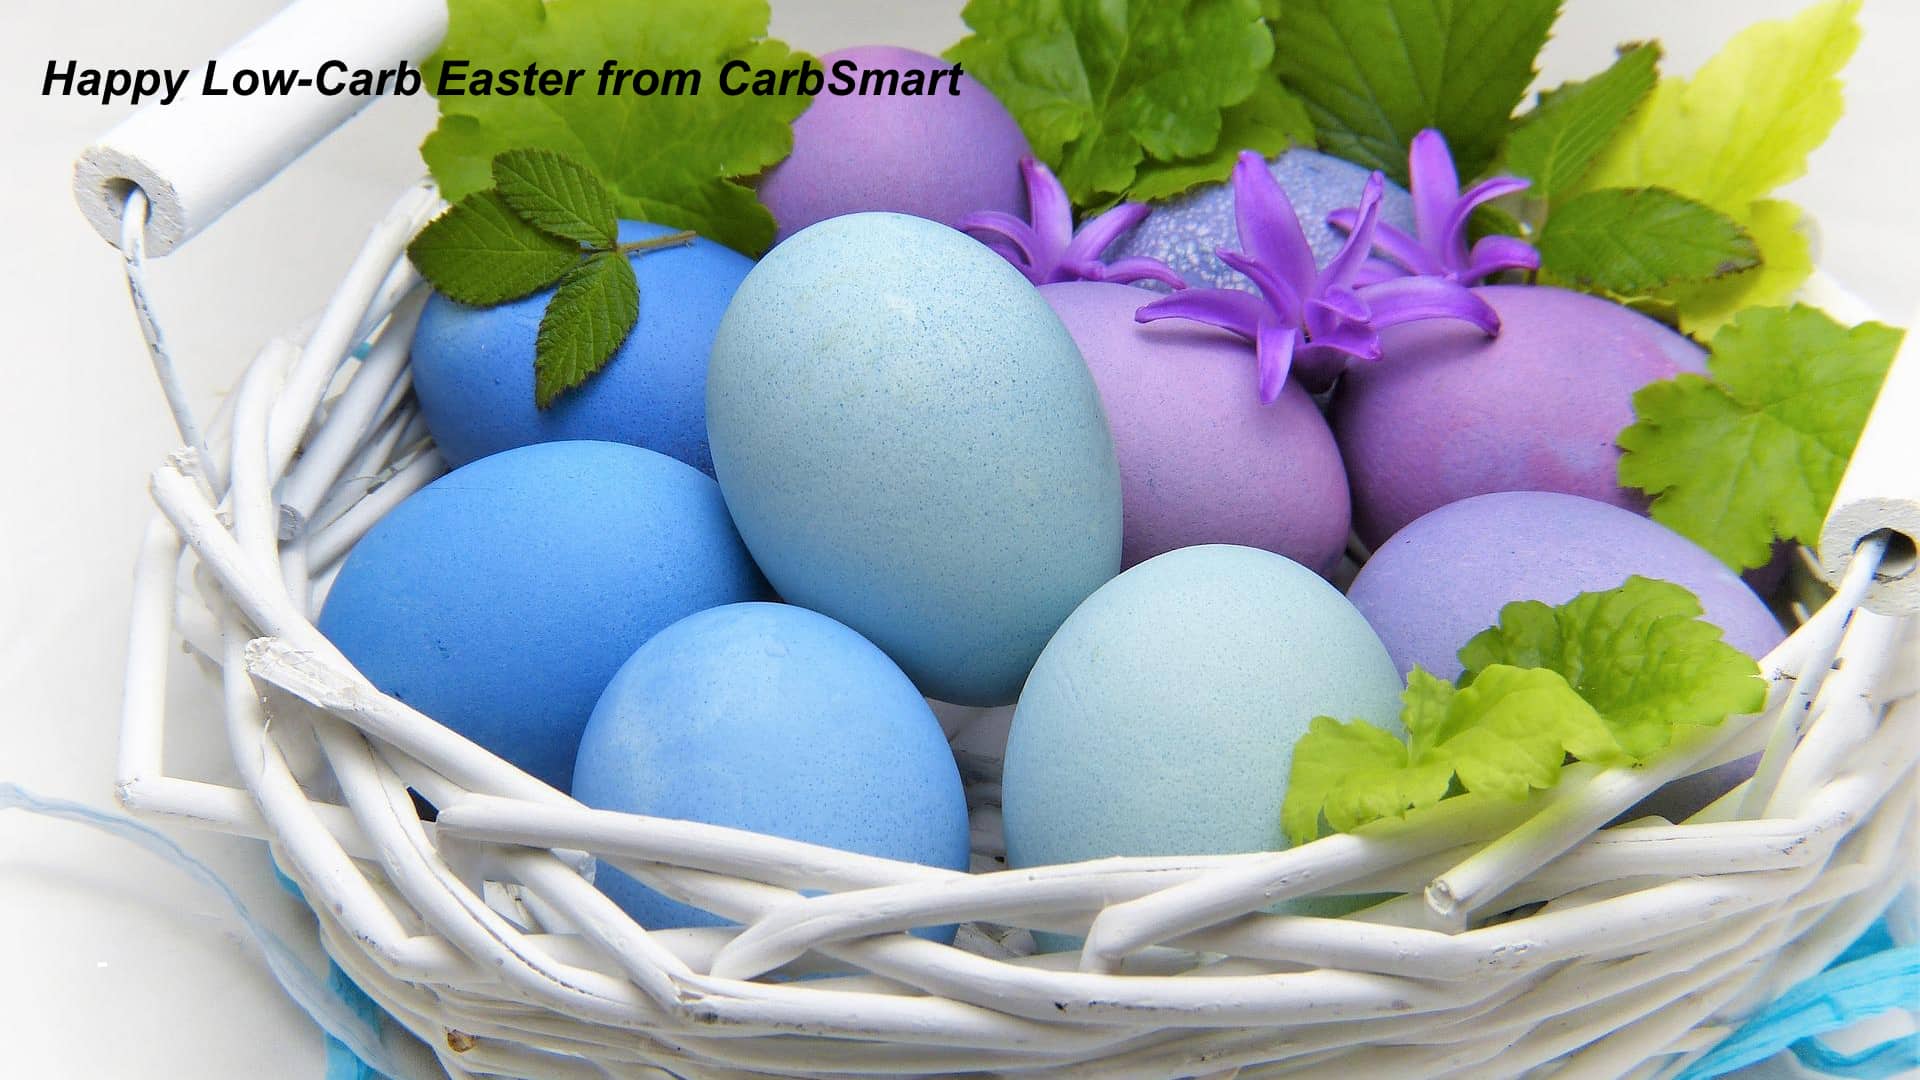 Happy Low-Carb Easter from CarbSmart